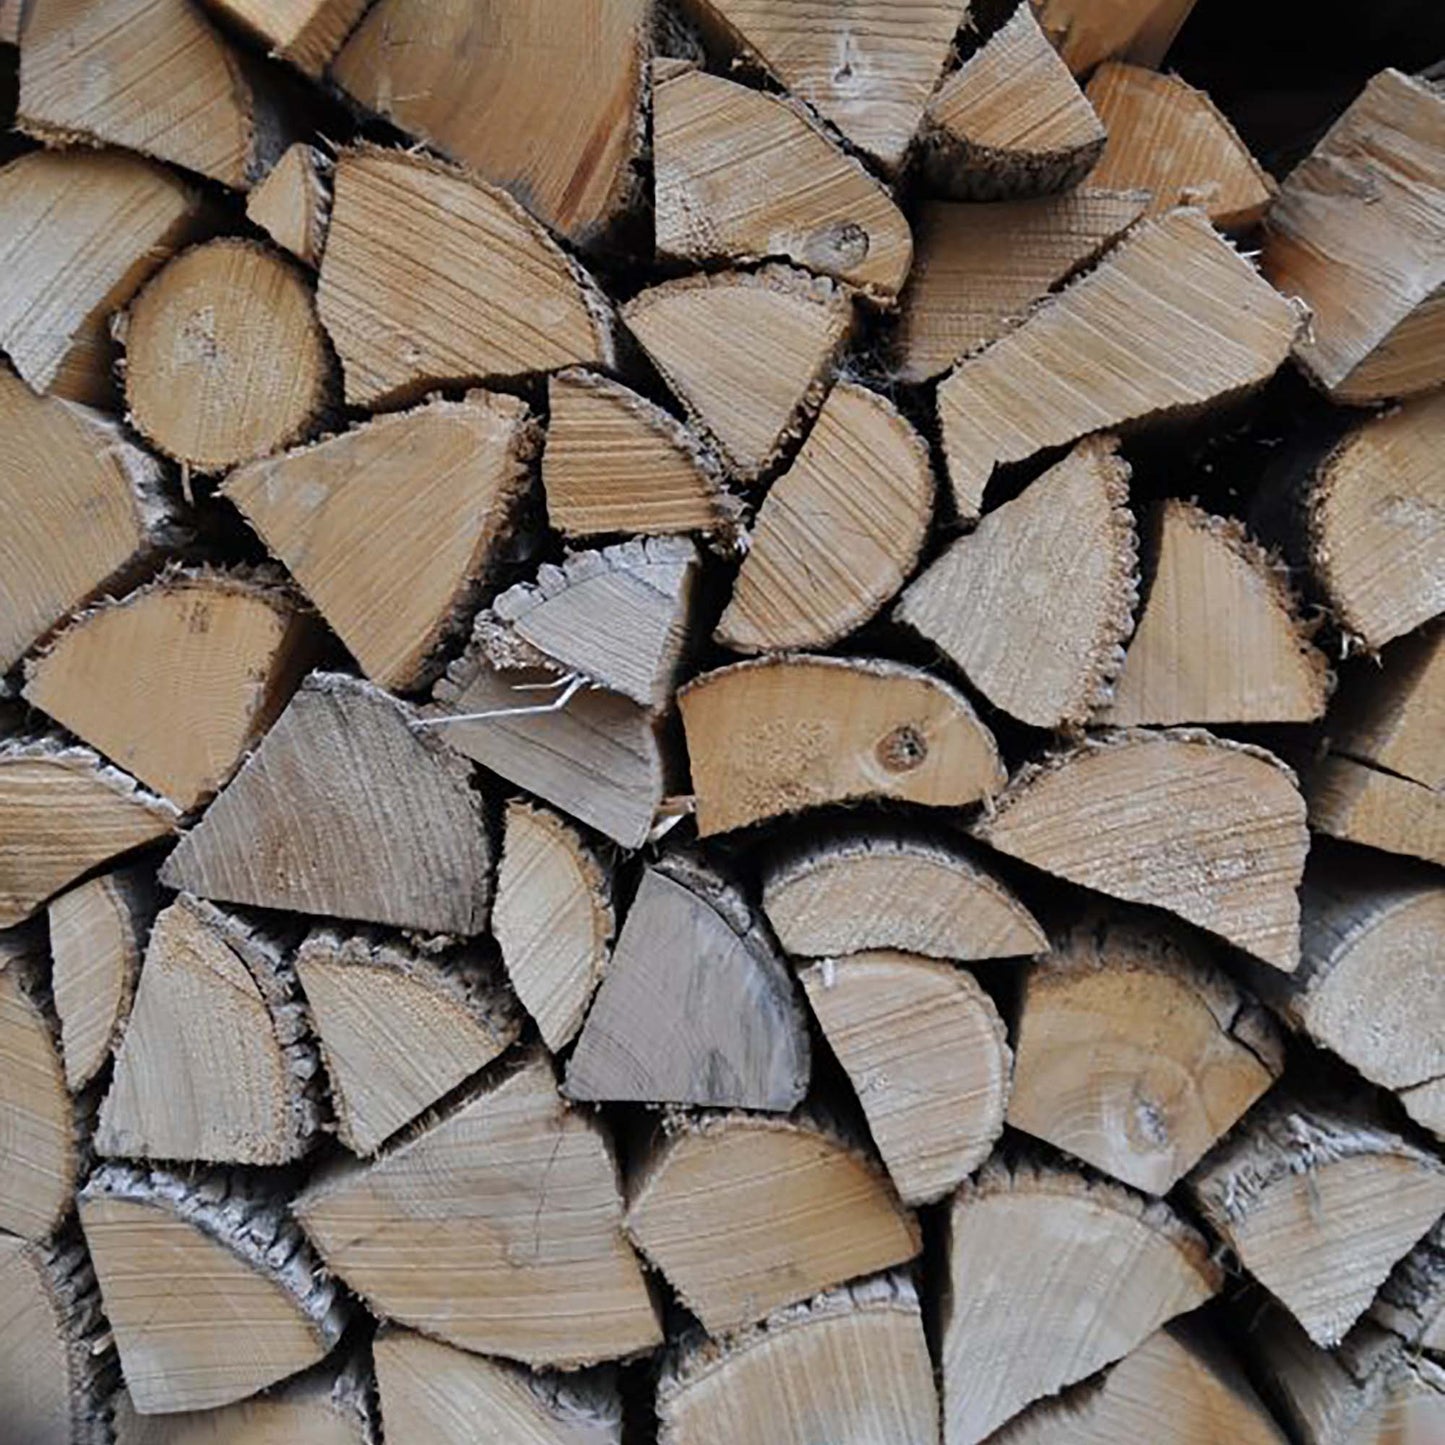 Wood Burner Kit Kiln Dried Fire Logs for Stoves & Fireplaces